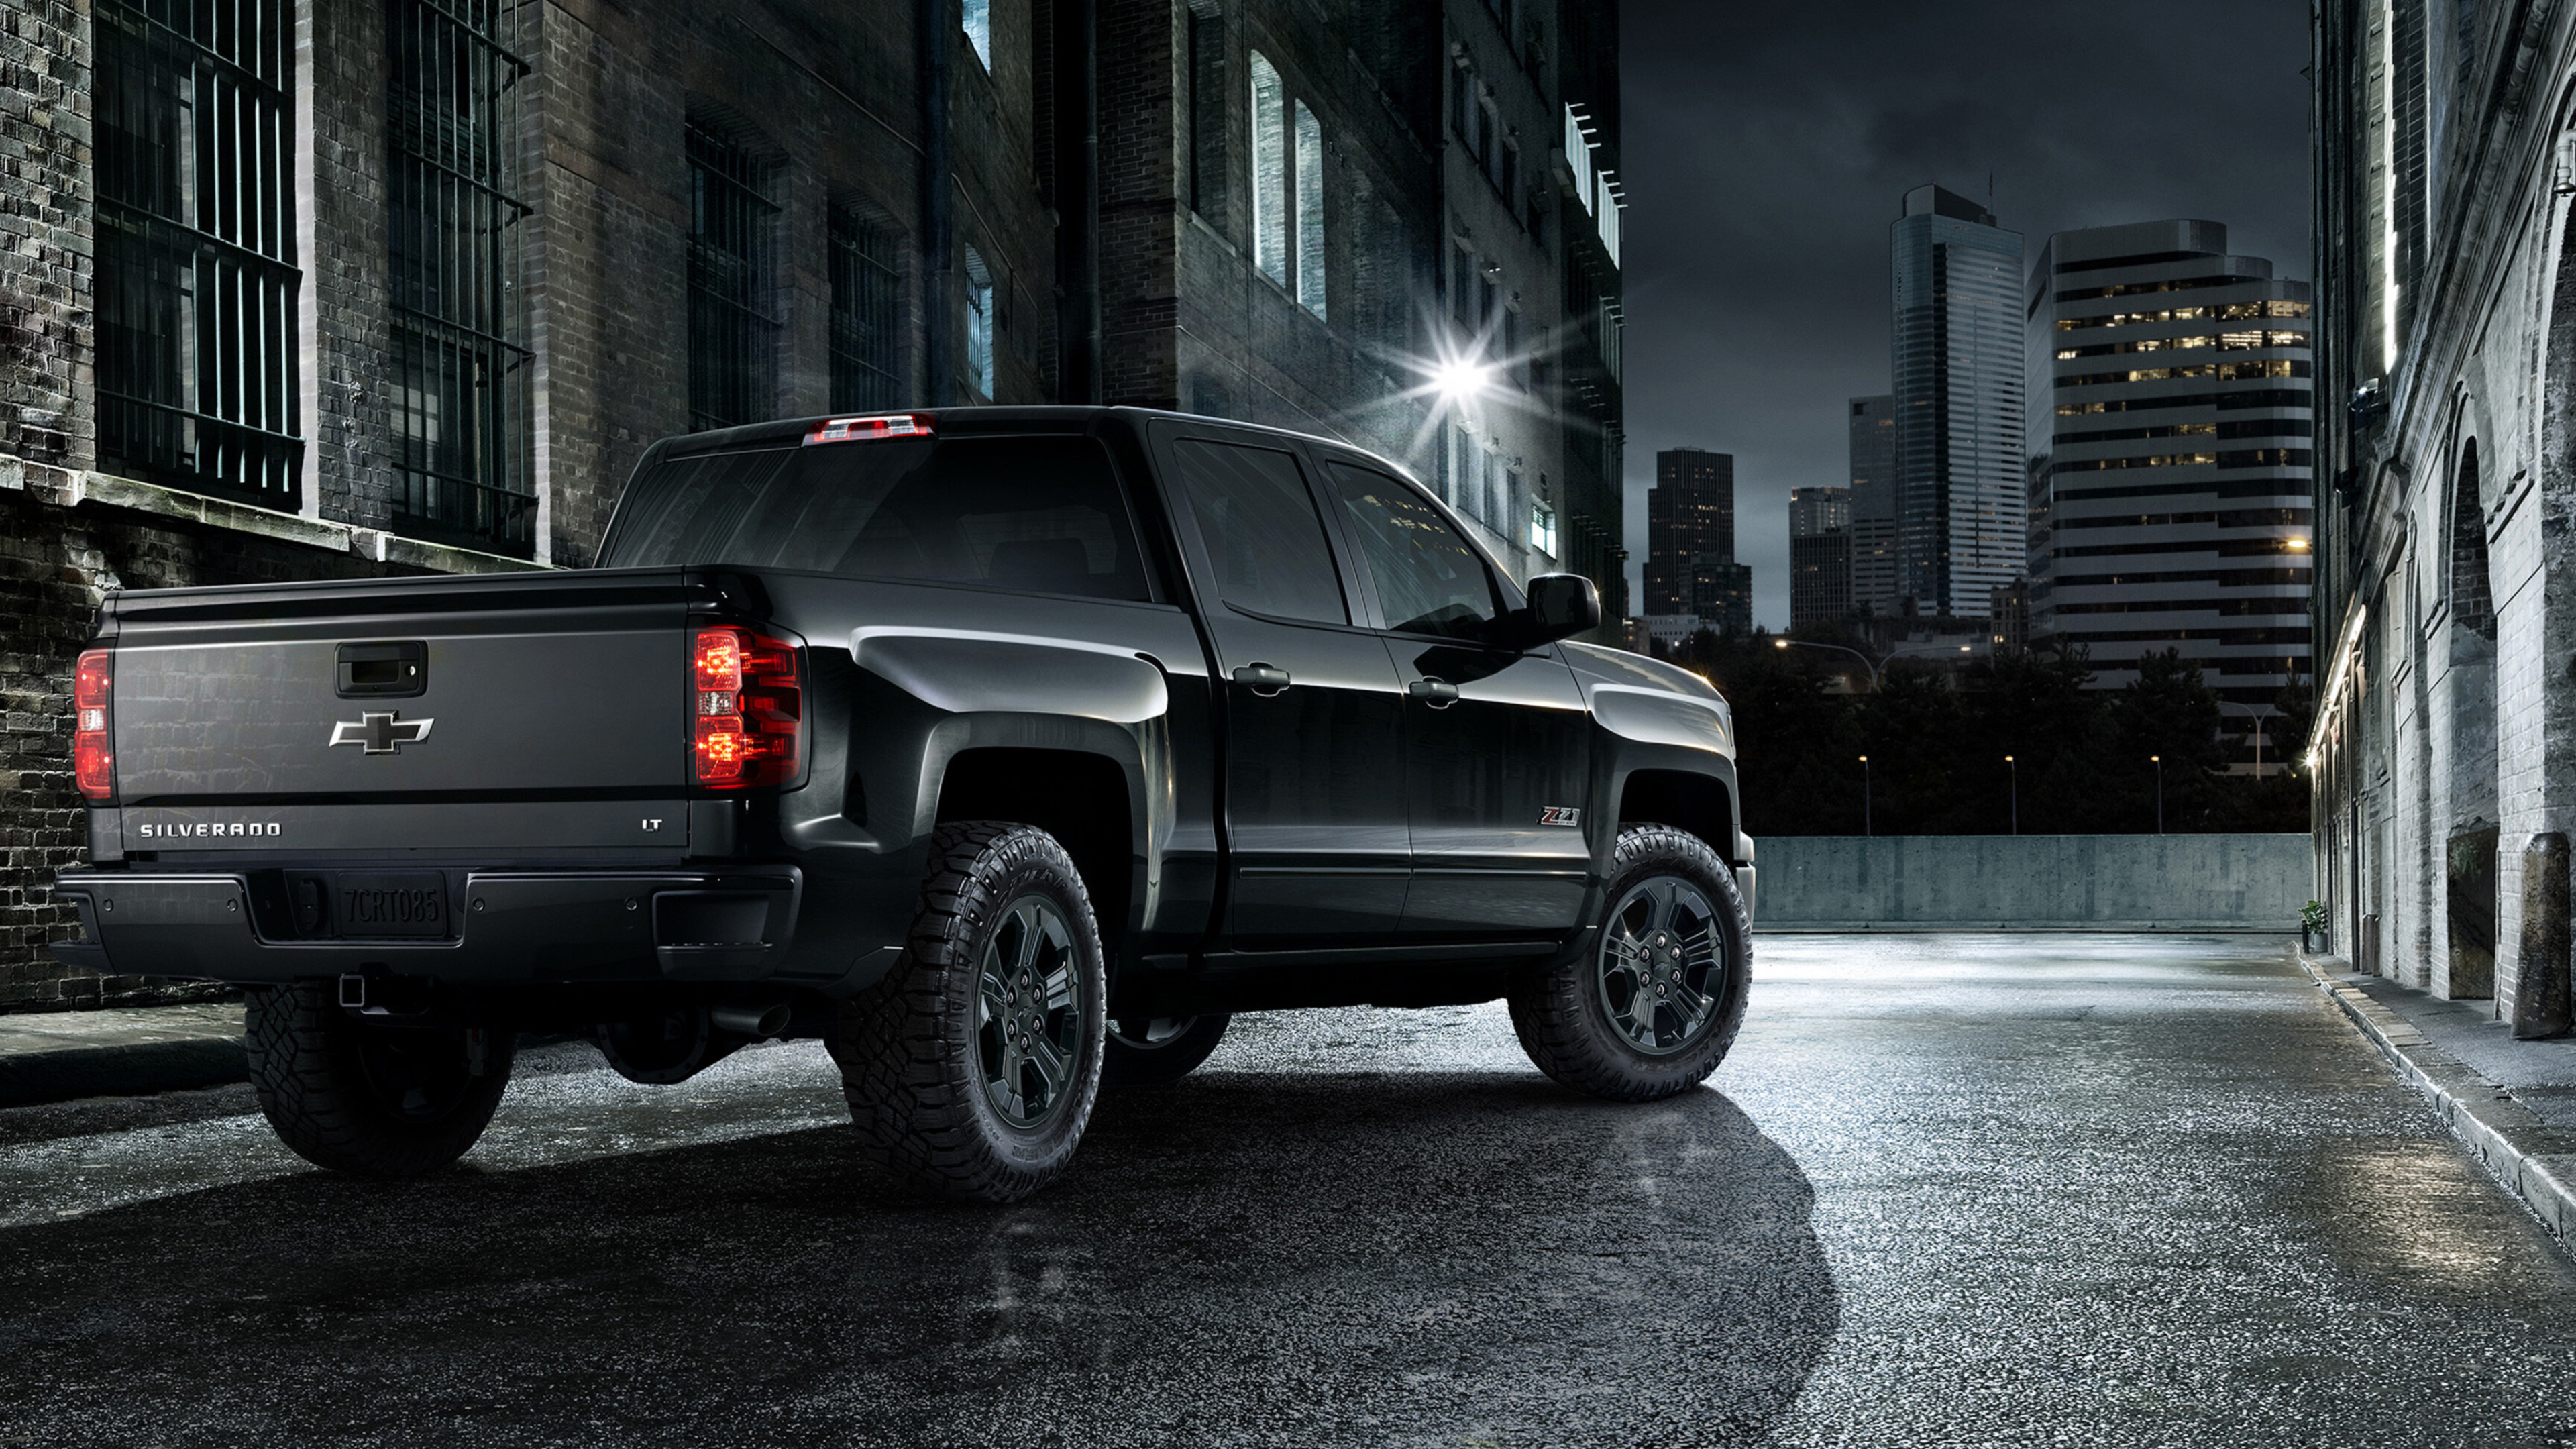 Chevrolet Silverado: Chevy's pickup, A max towing capacity of 13,300 pounds. 3840x2160 4K Wallpaper.